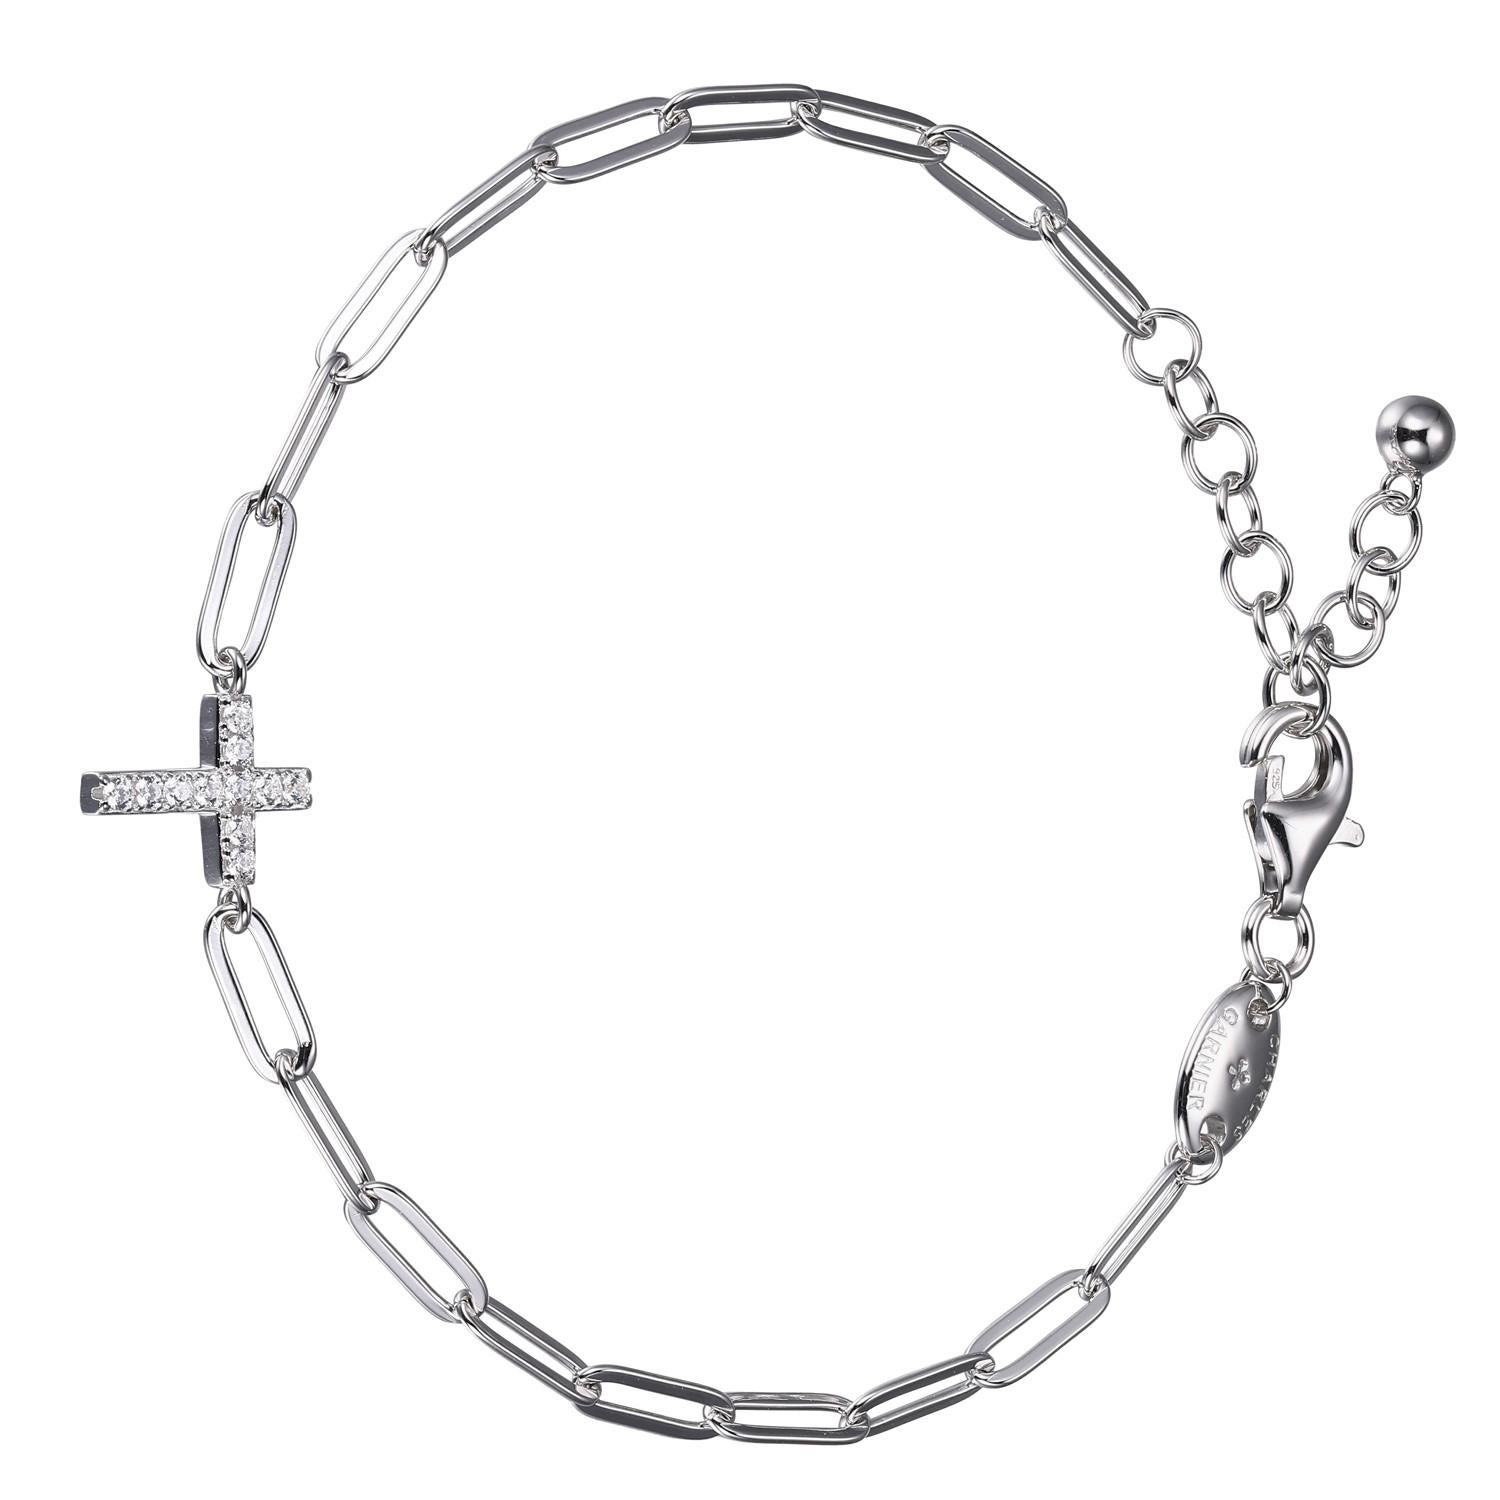 Sterling Silver Bracelet made with Paperclip Chain (3mm) and CZ Cross in Center, Measures 6.75